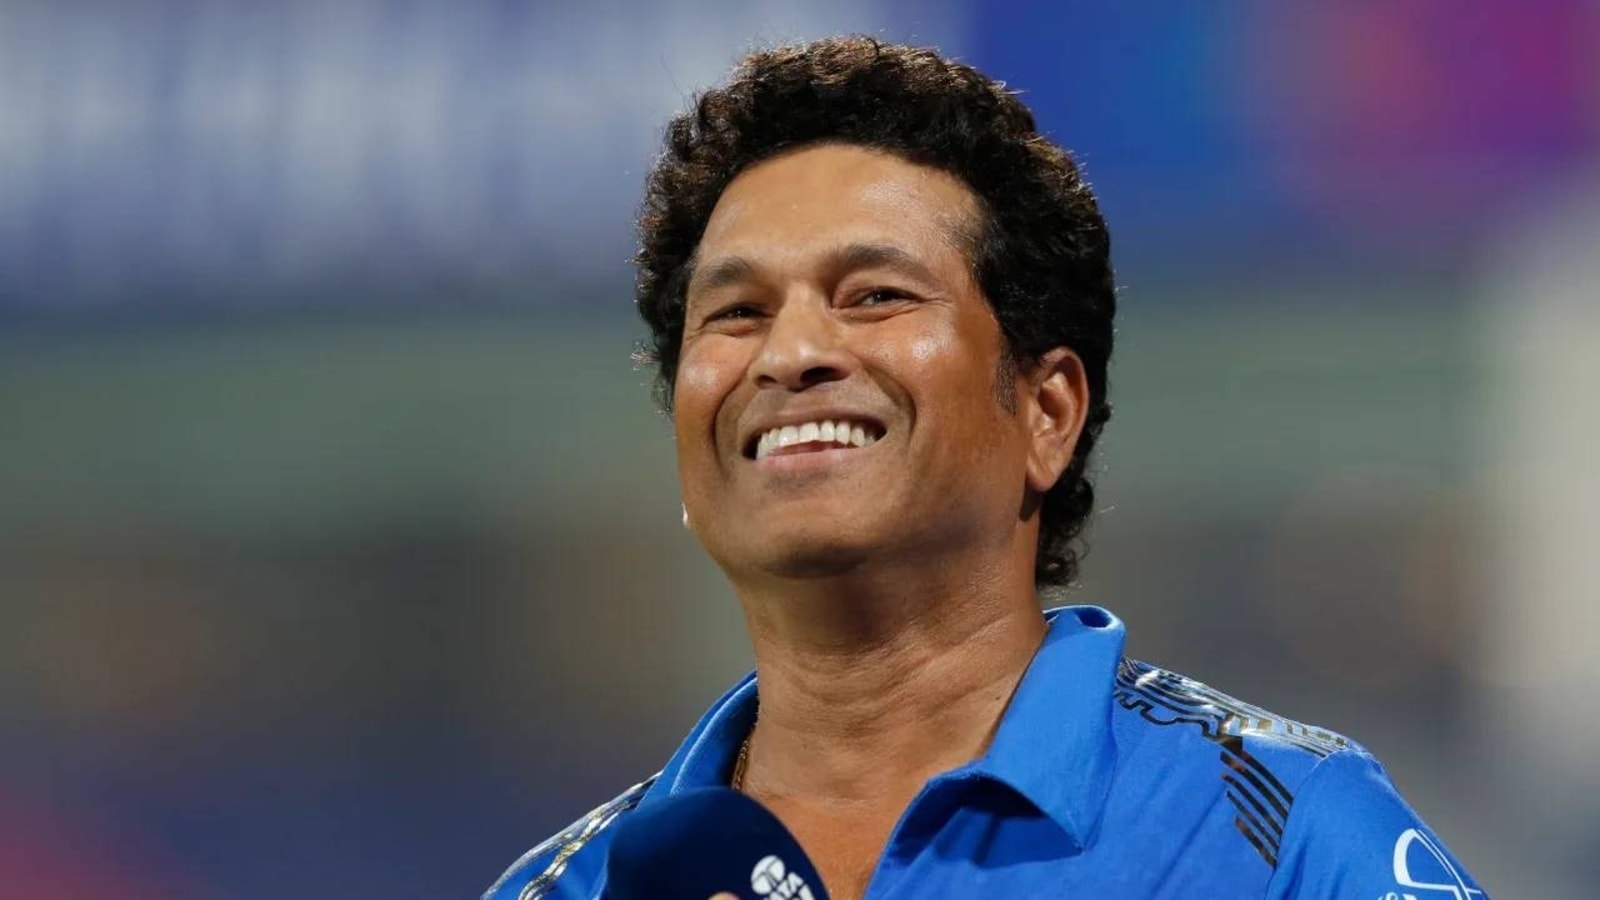 He knows he needn't worry about getting picked': Tendulkar on ...